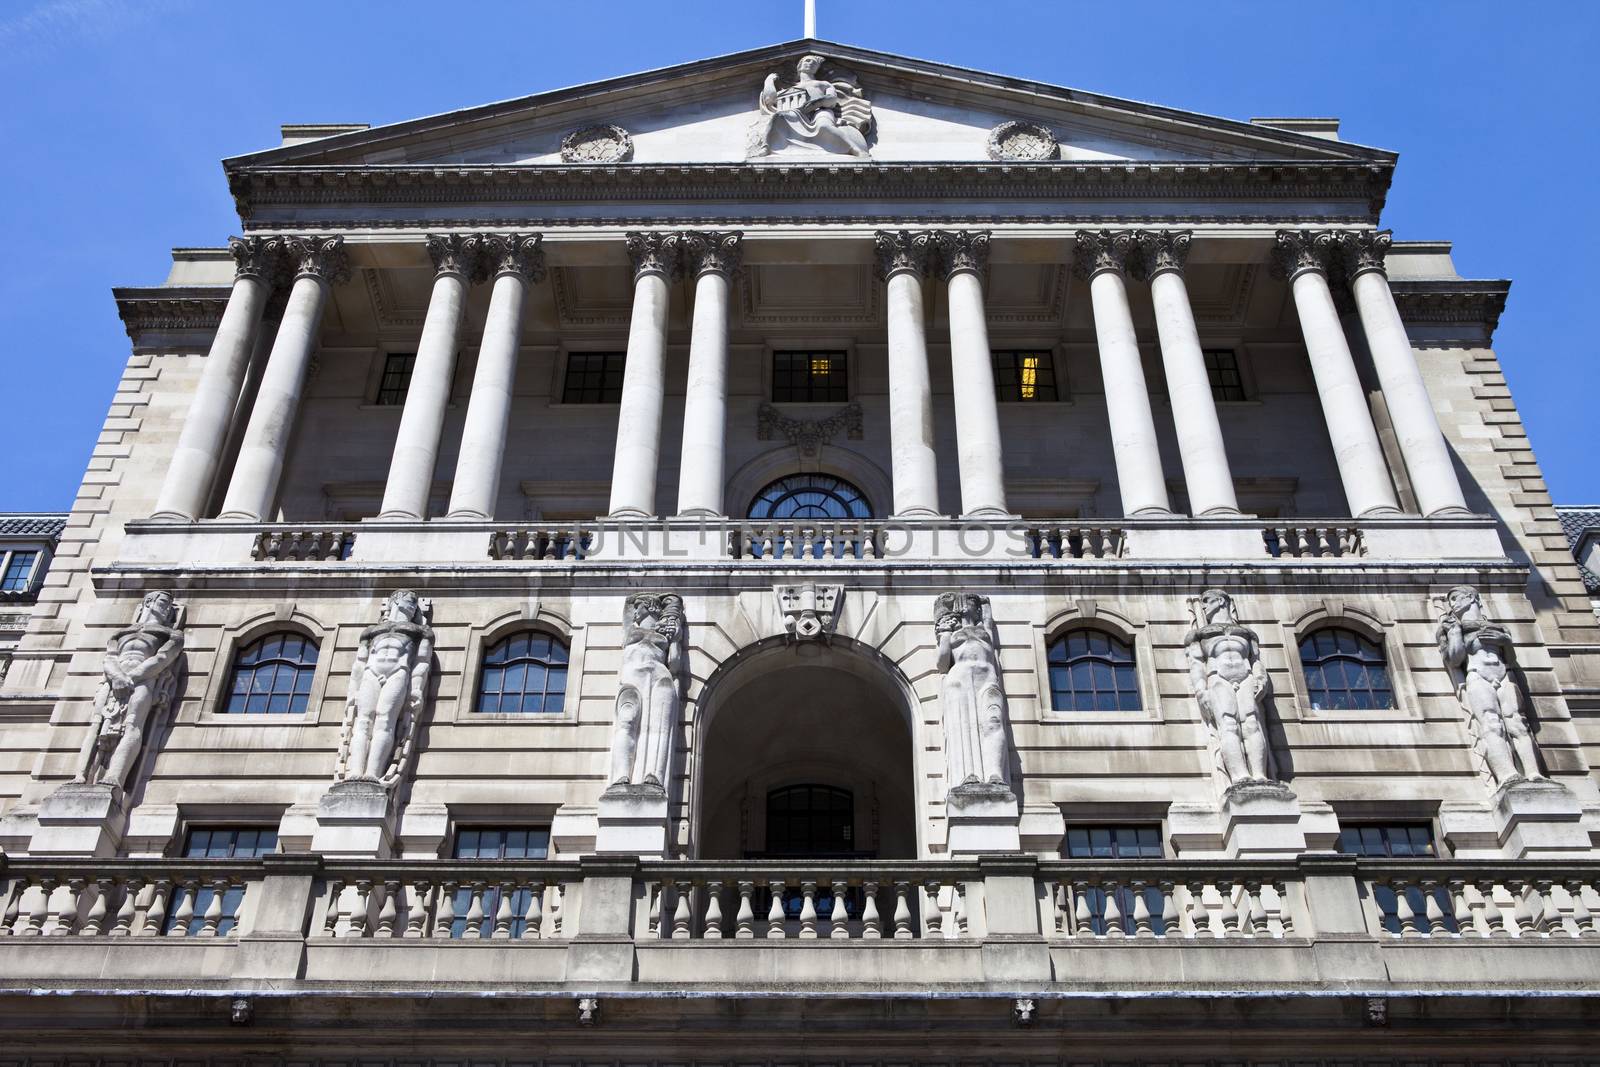 The impressive facade of the Bank of England located in the City of London.